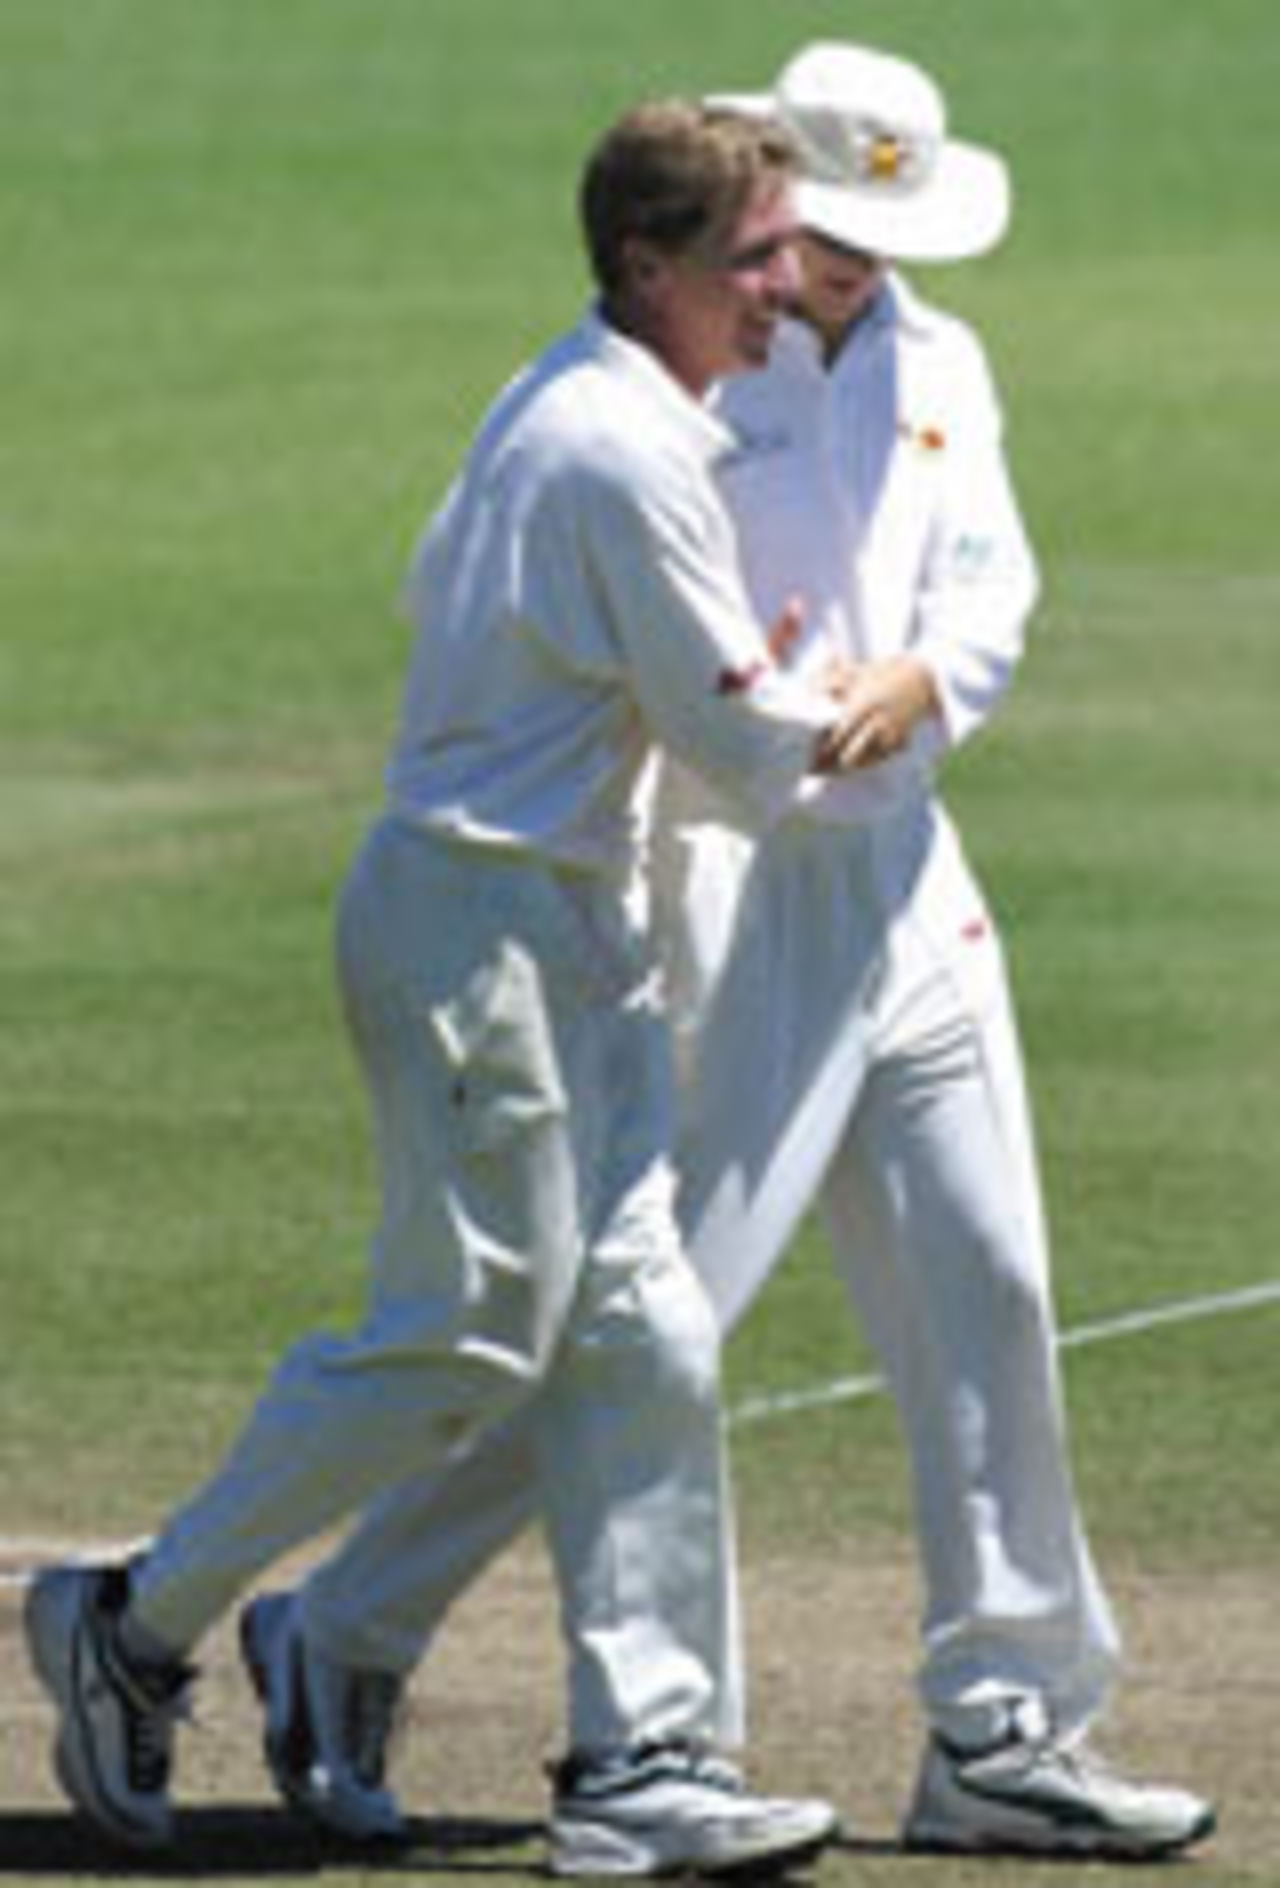 Ray Price congratulated after taking the wicket of Ricky Ponting, Australia v Zimbabwe, 2nd Test, Sydney, 3rd day, October 19, 2003